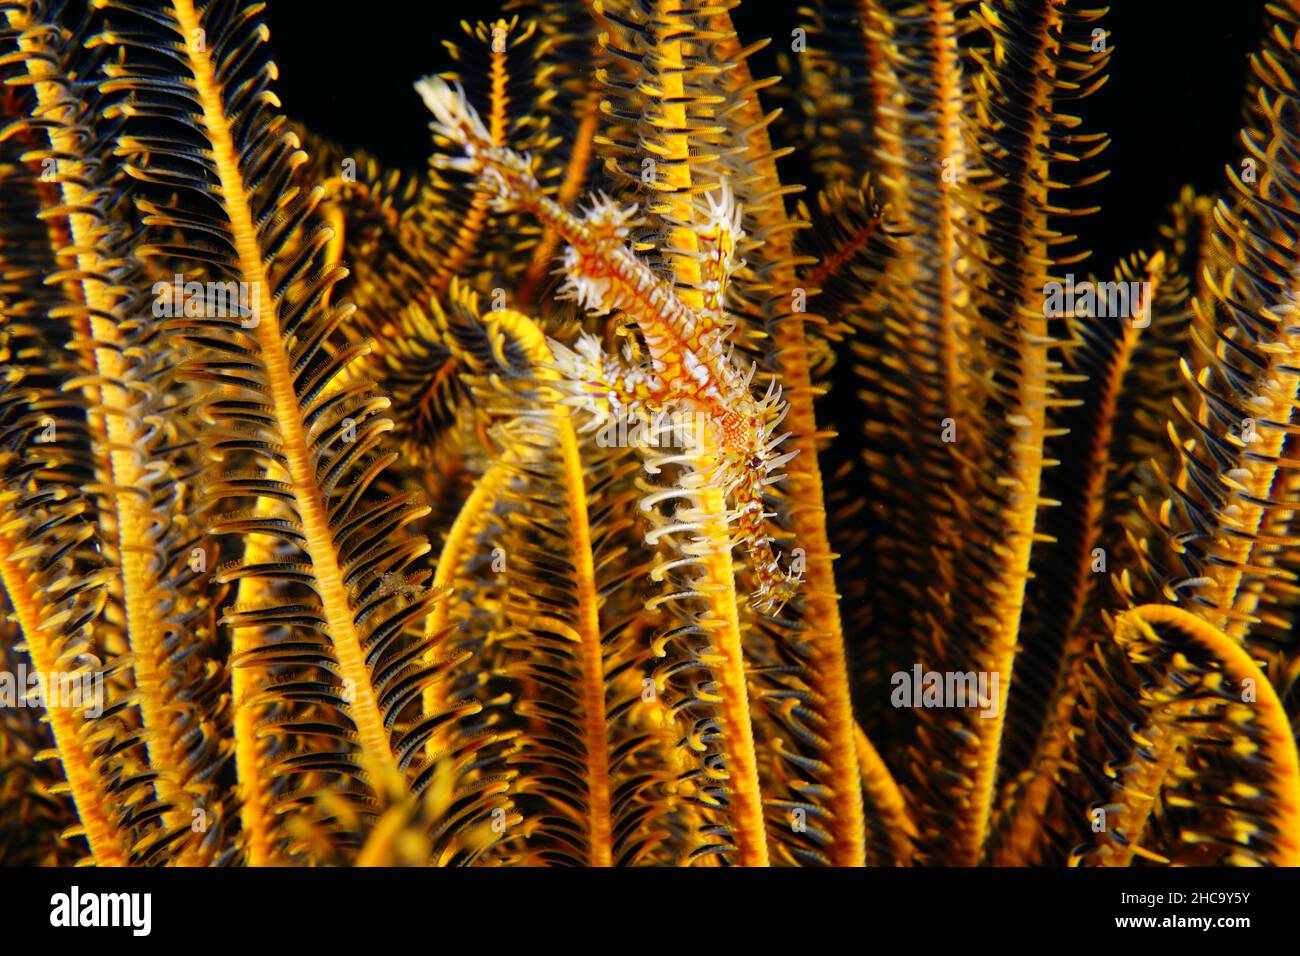 The ghost pipefish underwater; scuba diving in a coral reef, Bali island, Indonesia Stock Photo